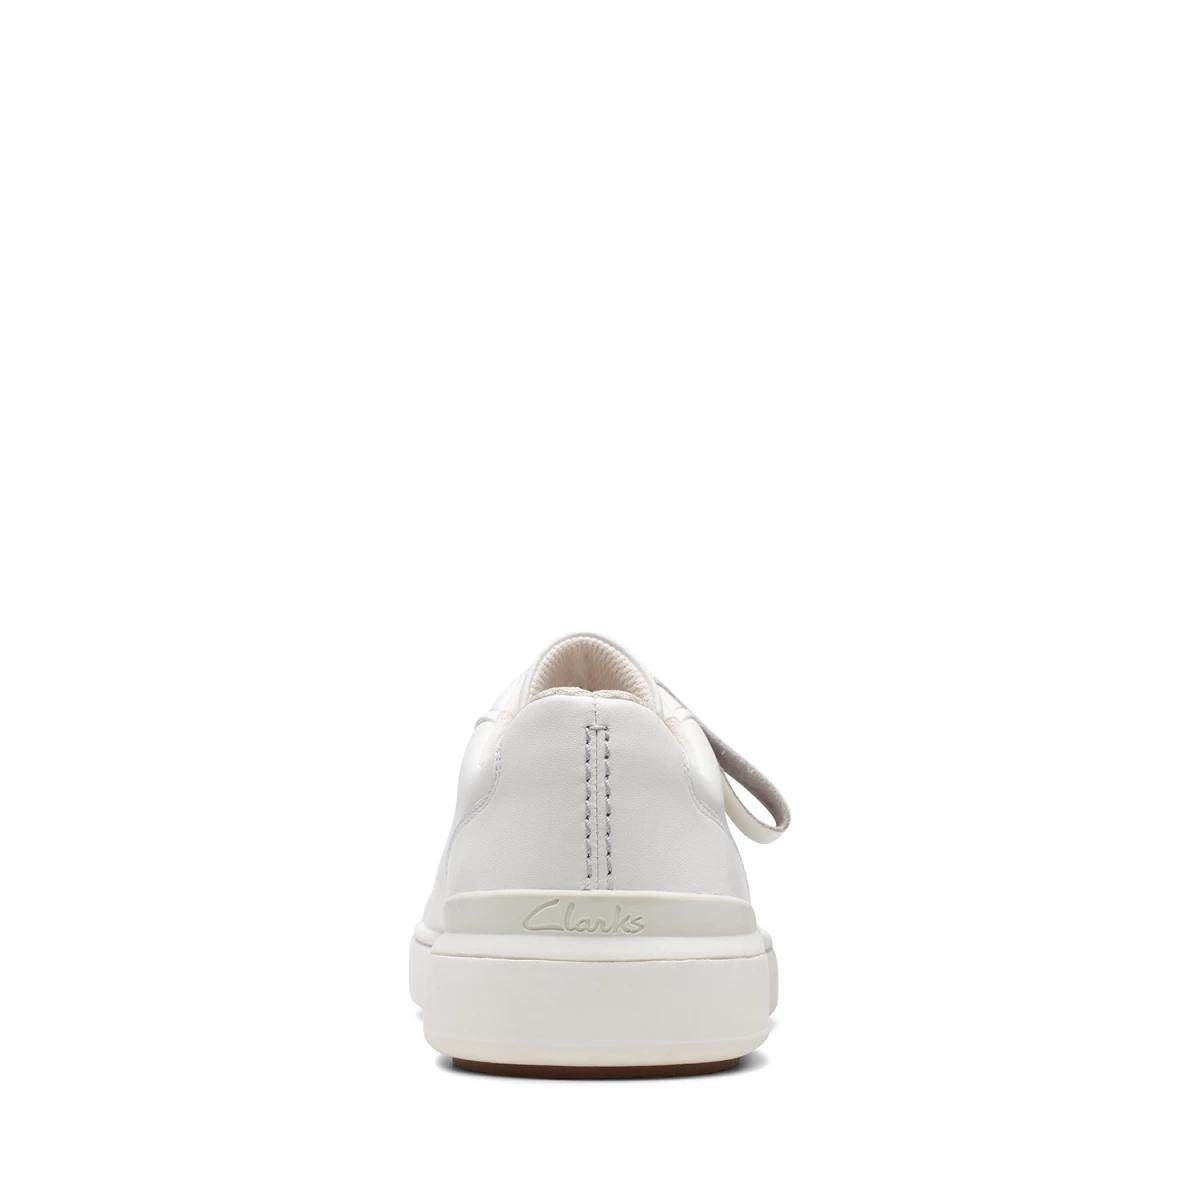 Clarks Craft Cup Court Women s Trainer - Leather Off White Combi D